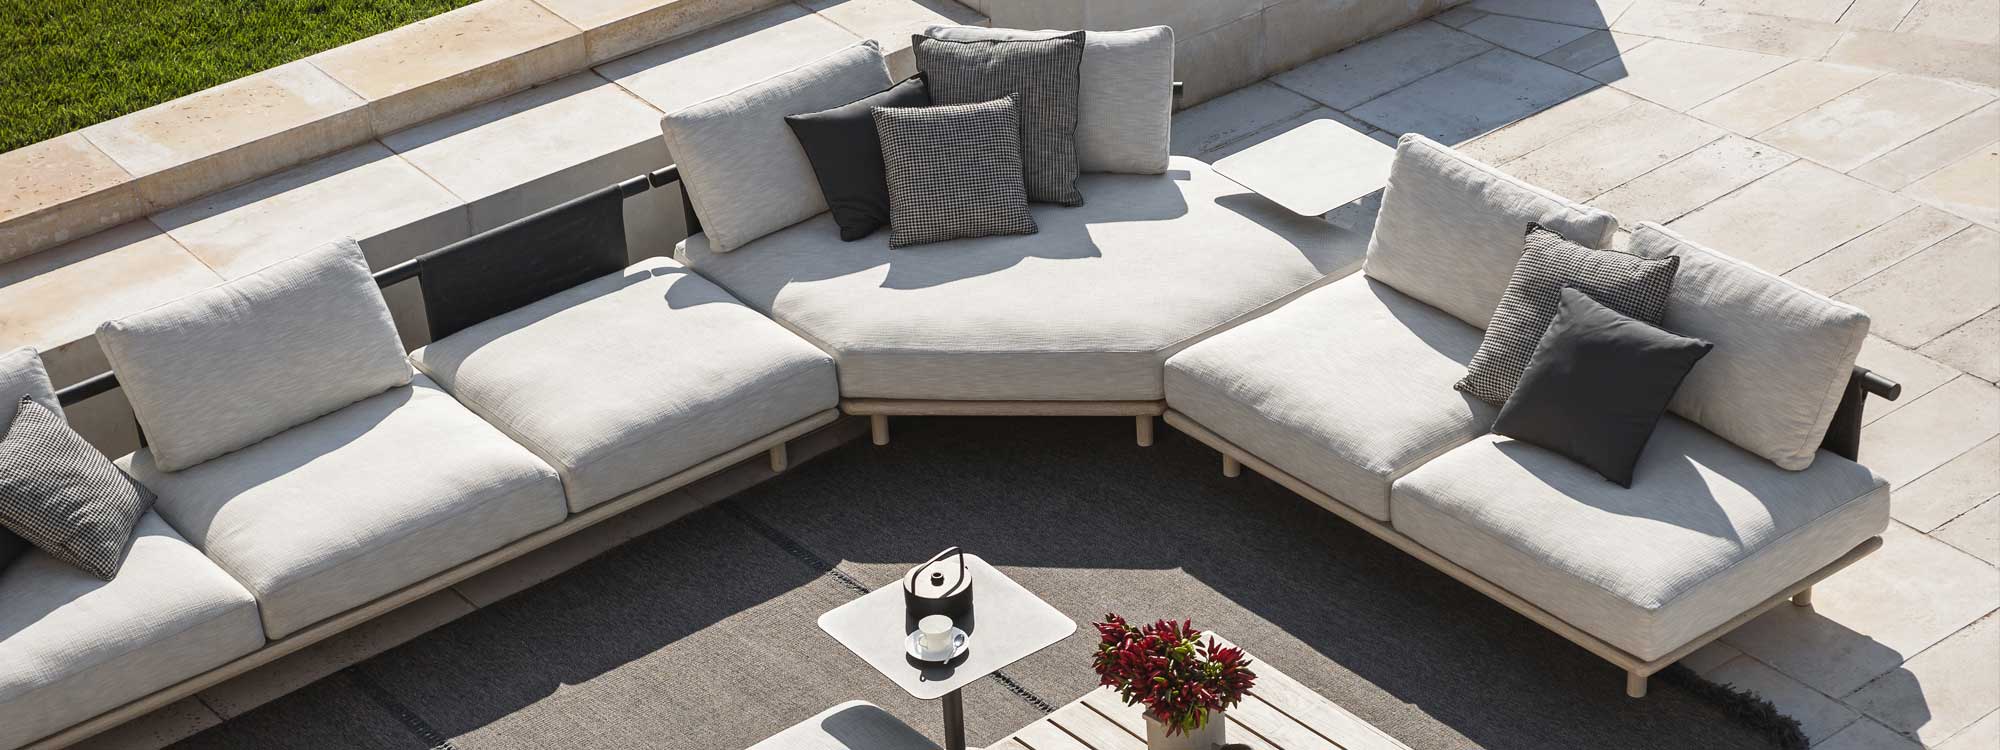 Image of aerial view of RODA Eden minimalist garden sofa, showing hexagonal corner unit, with Double ottoman, Bernardo low table and Eden low table in the center